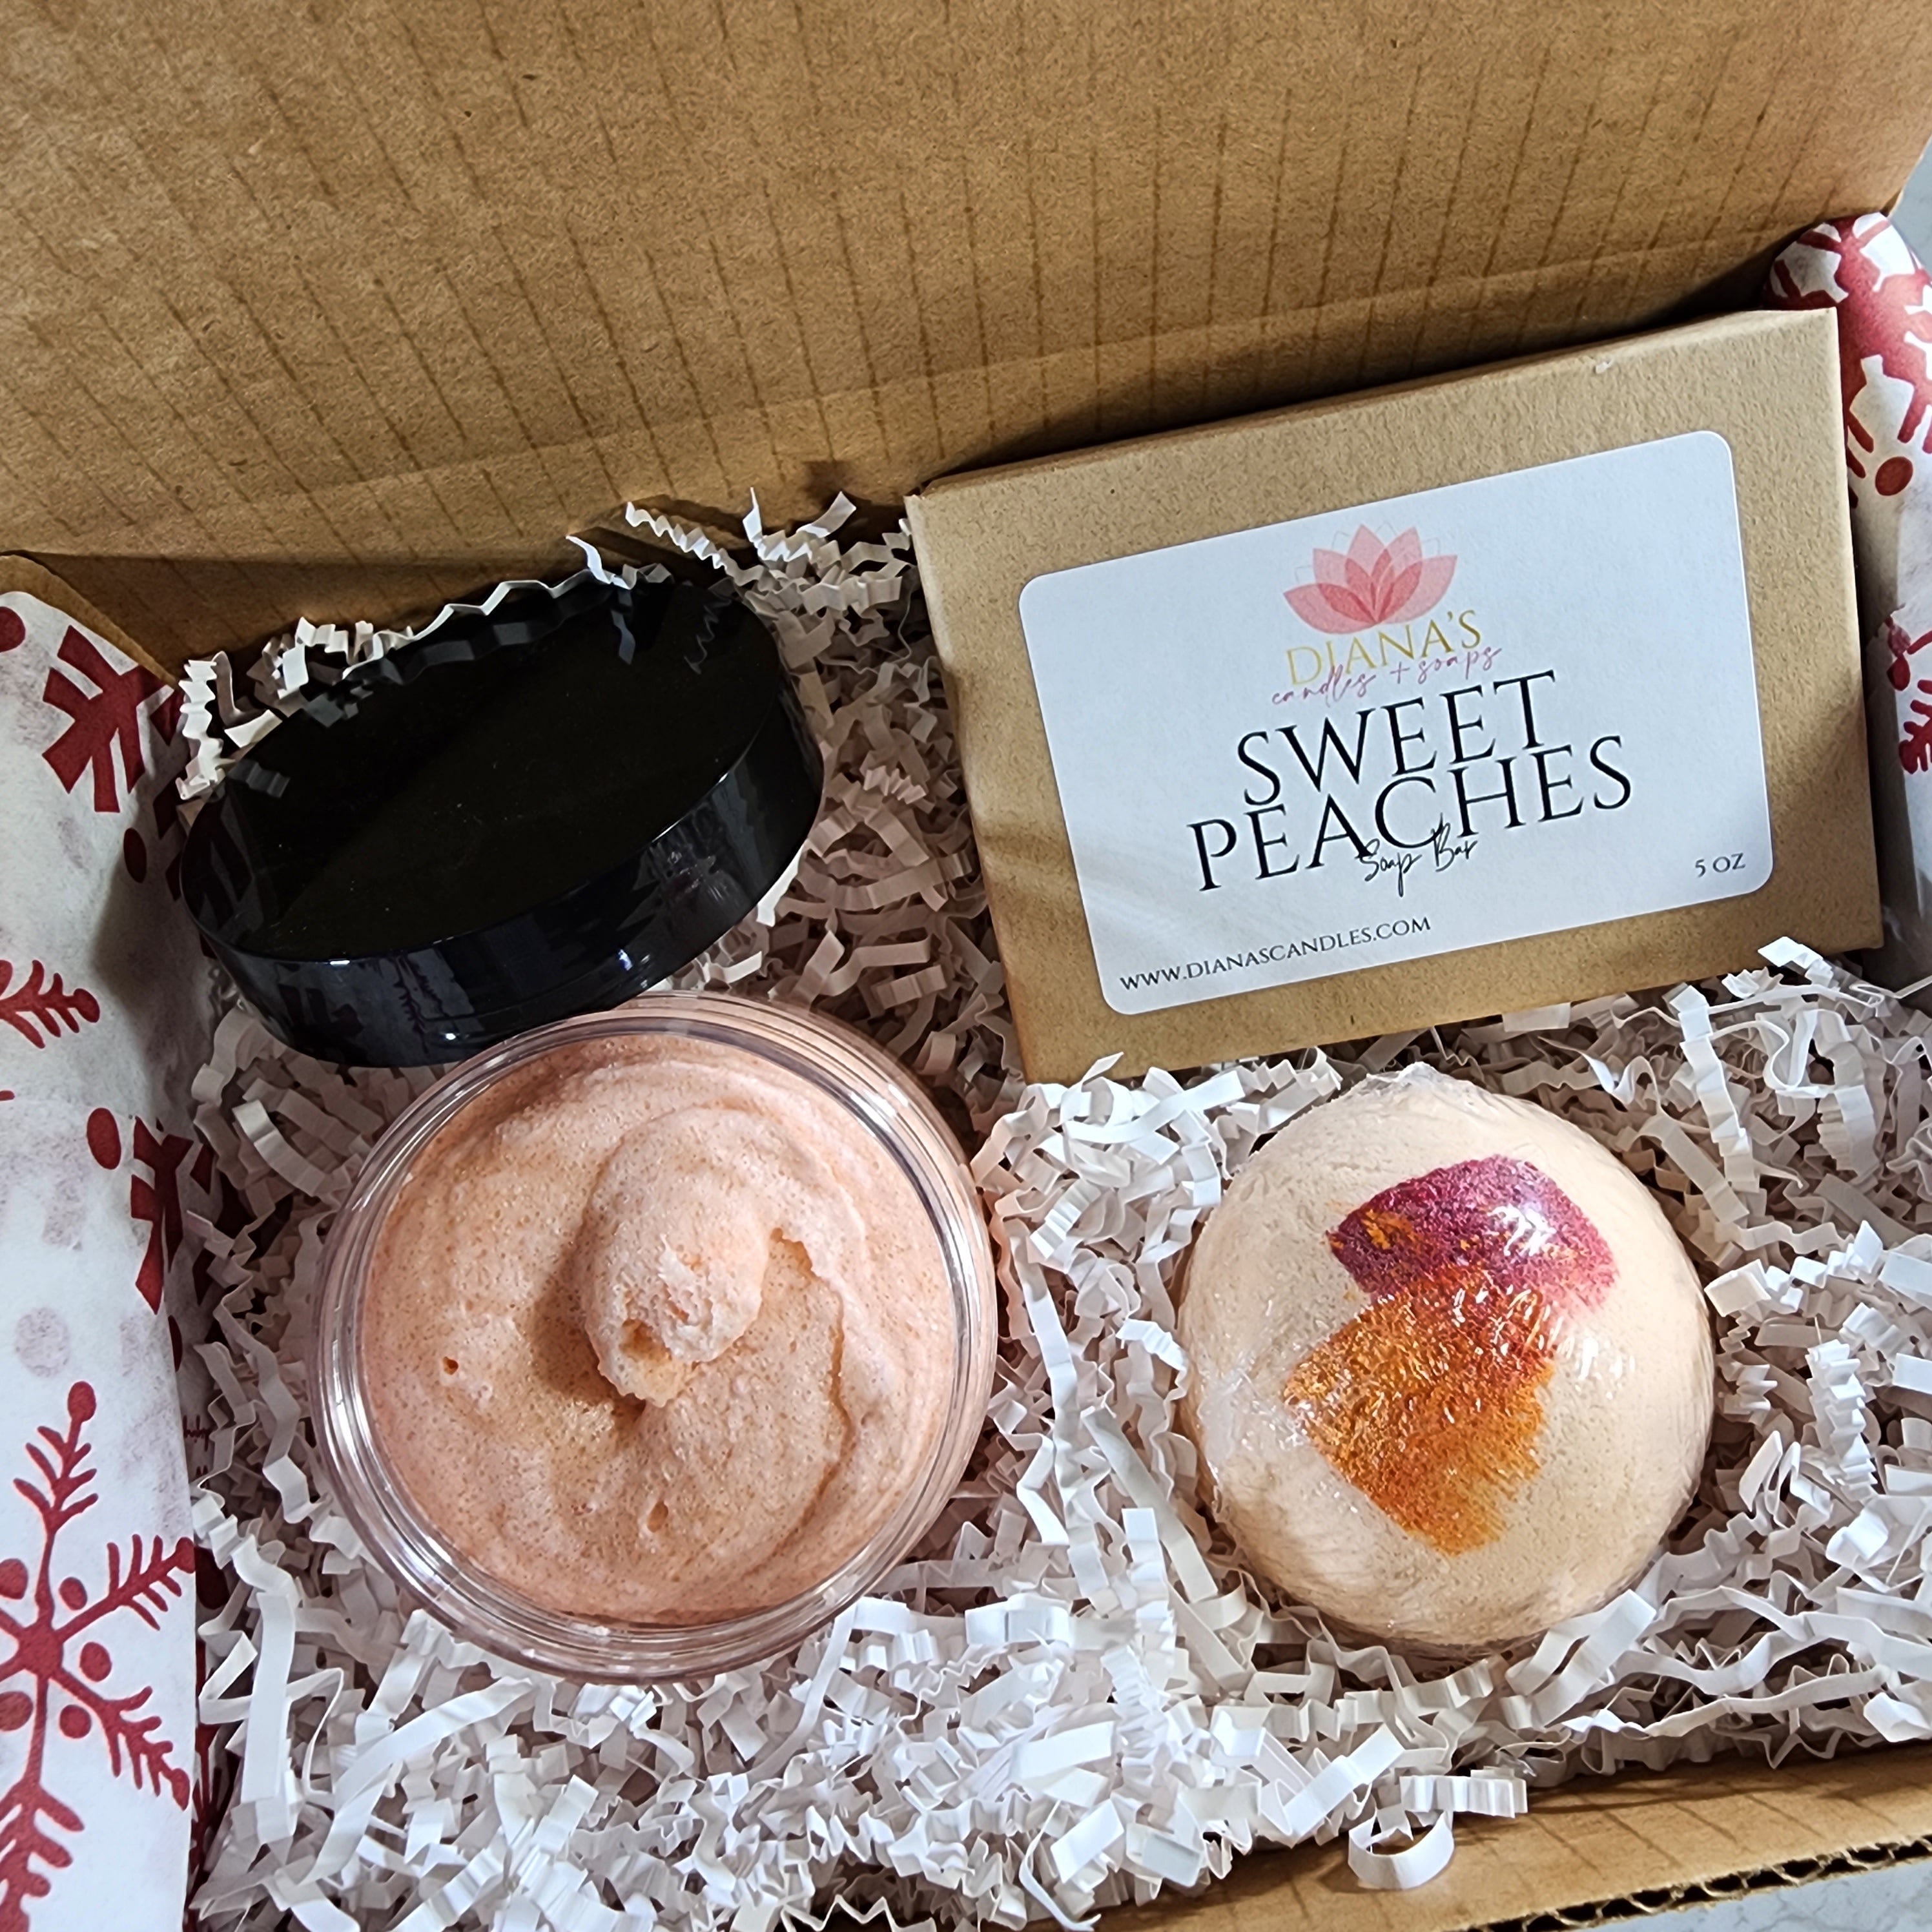 Sweet Peaches Gift Set Diana's Candles and Soaps